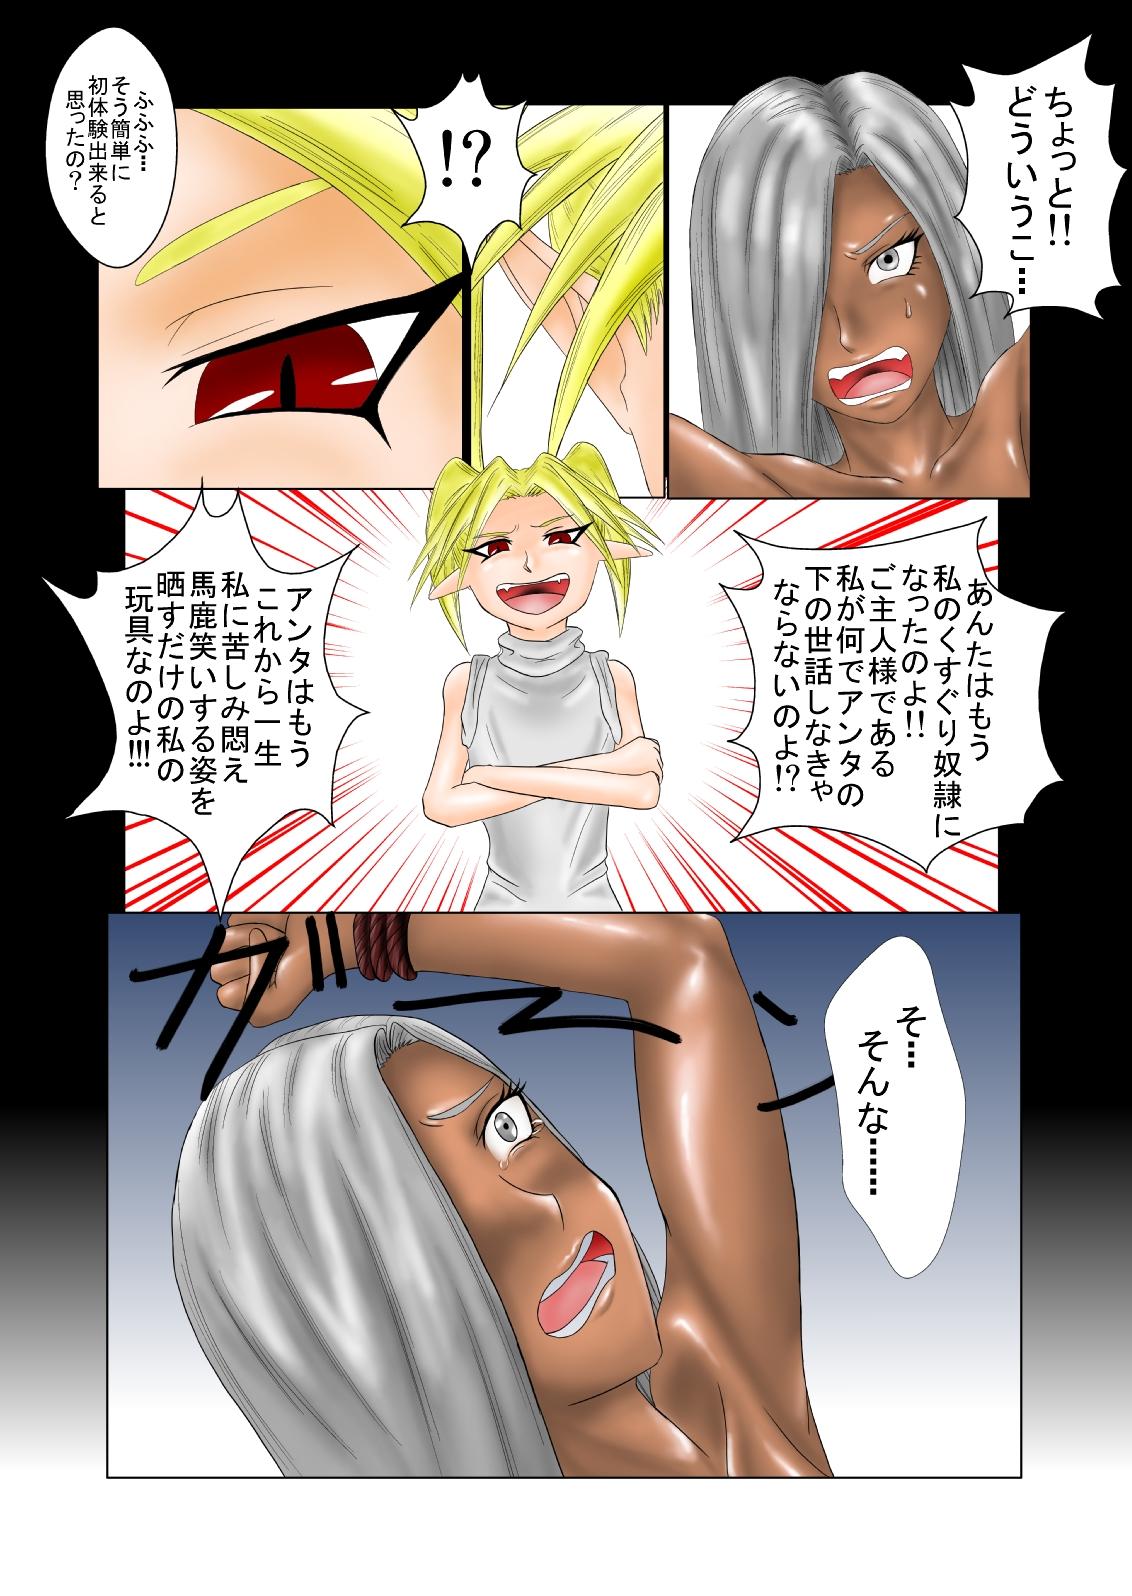 Pov Blowjob The Tales of Tickling Vol.2 Couples - Page 4